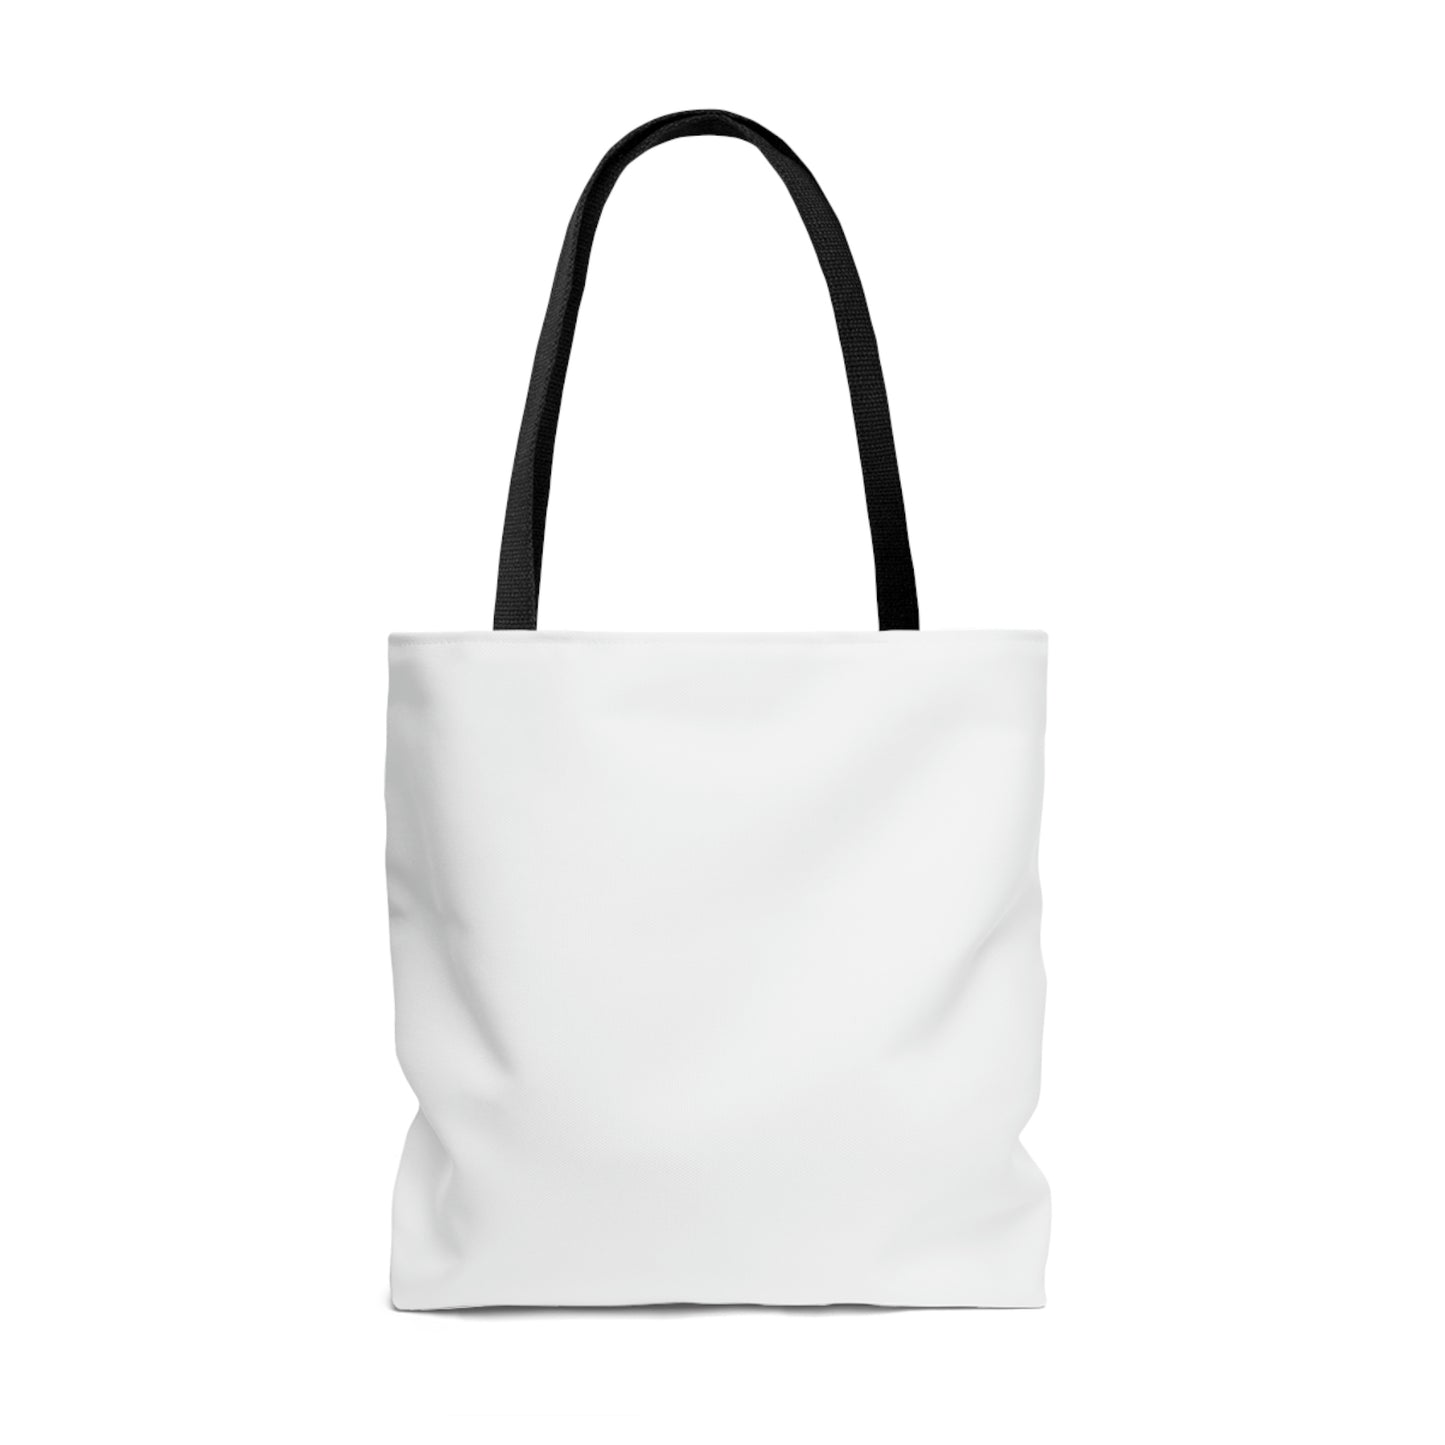 "Some Call It Chaos We Call It High School" tote bag